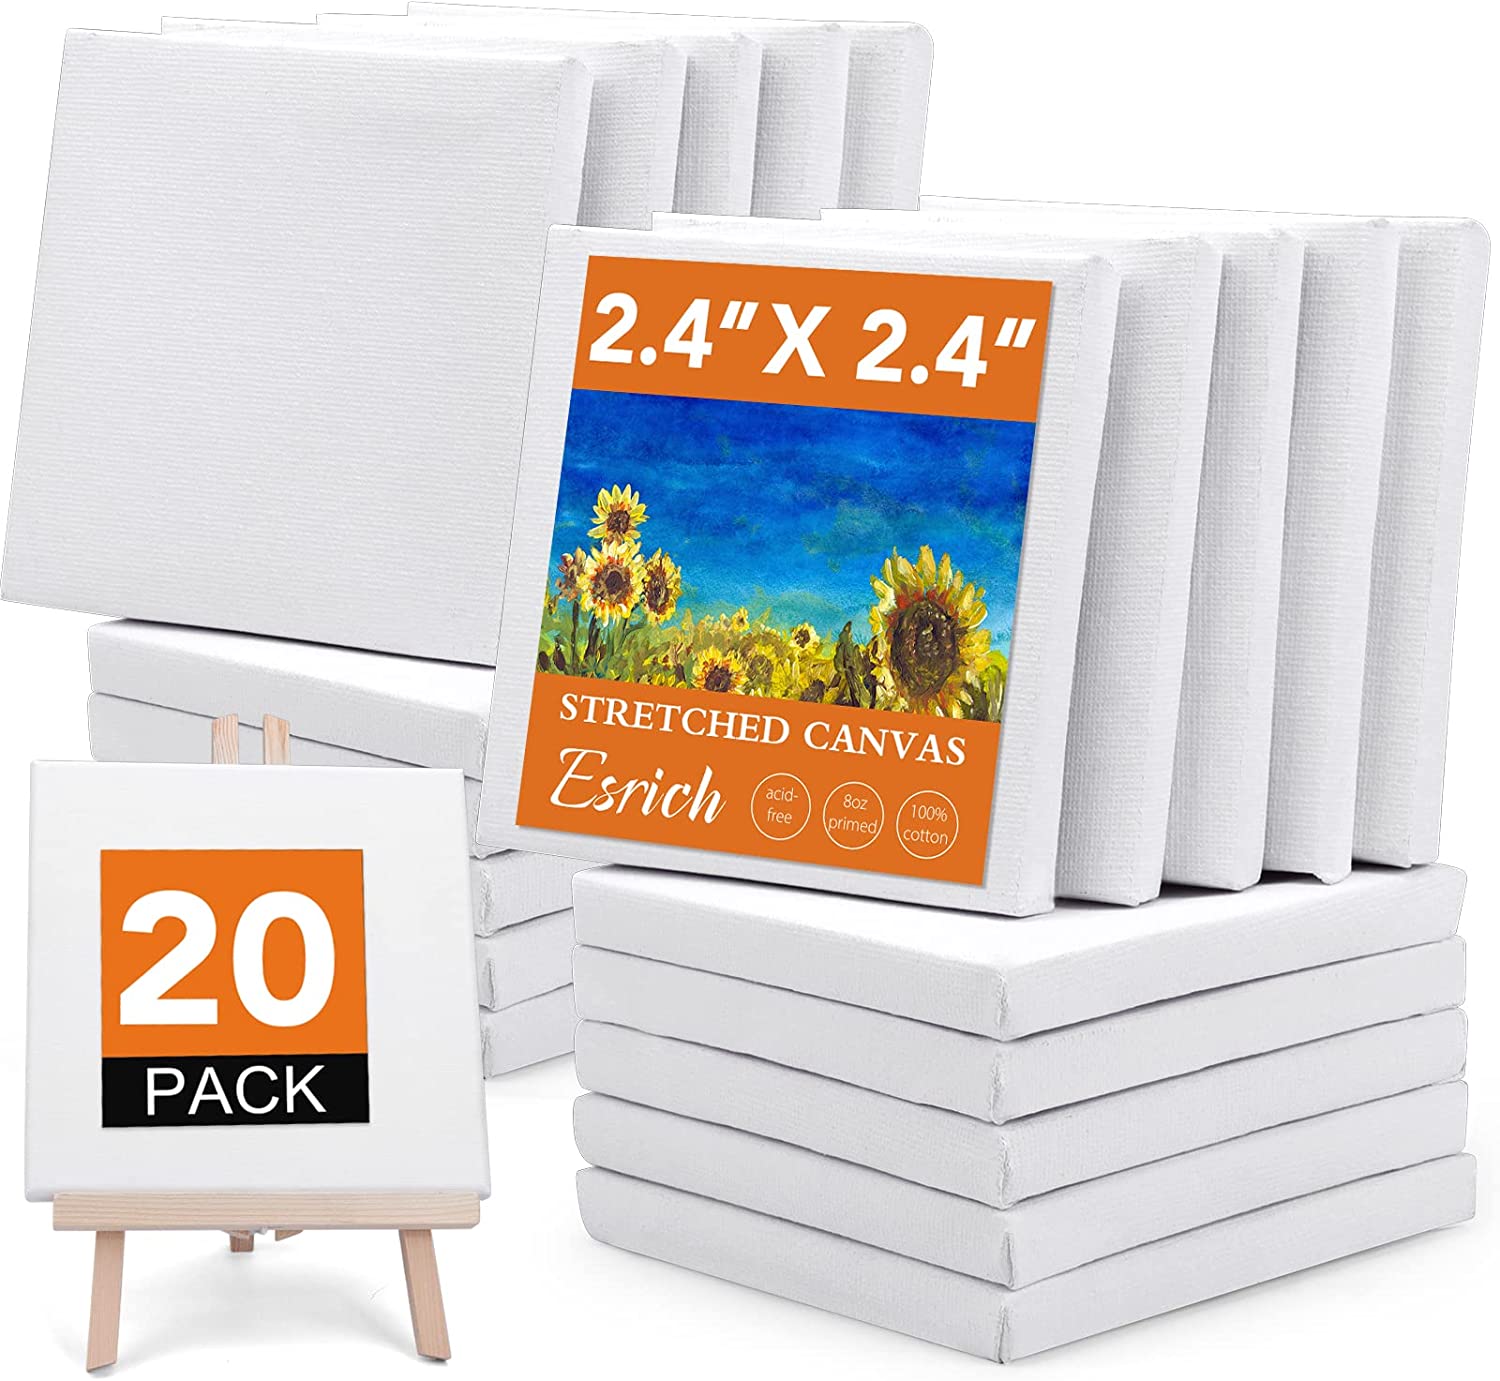 AUREUO Mini Stretched Canvas - 2x3 inch/24 Pack - 2/5 inch Profile Small Square Canvas - Gift Set for Kids, Bulk Pack Canvases for Acrylic Painting